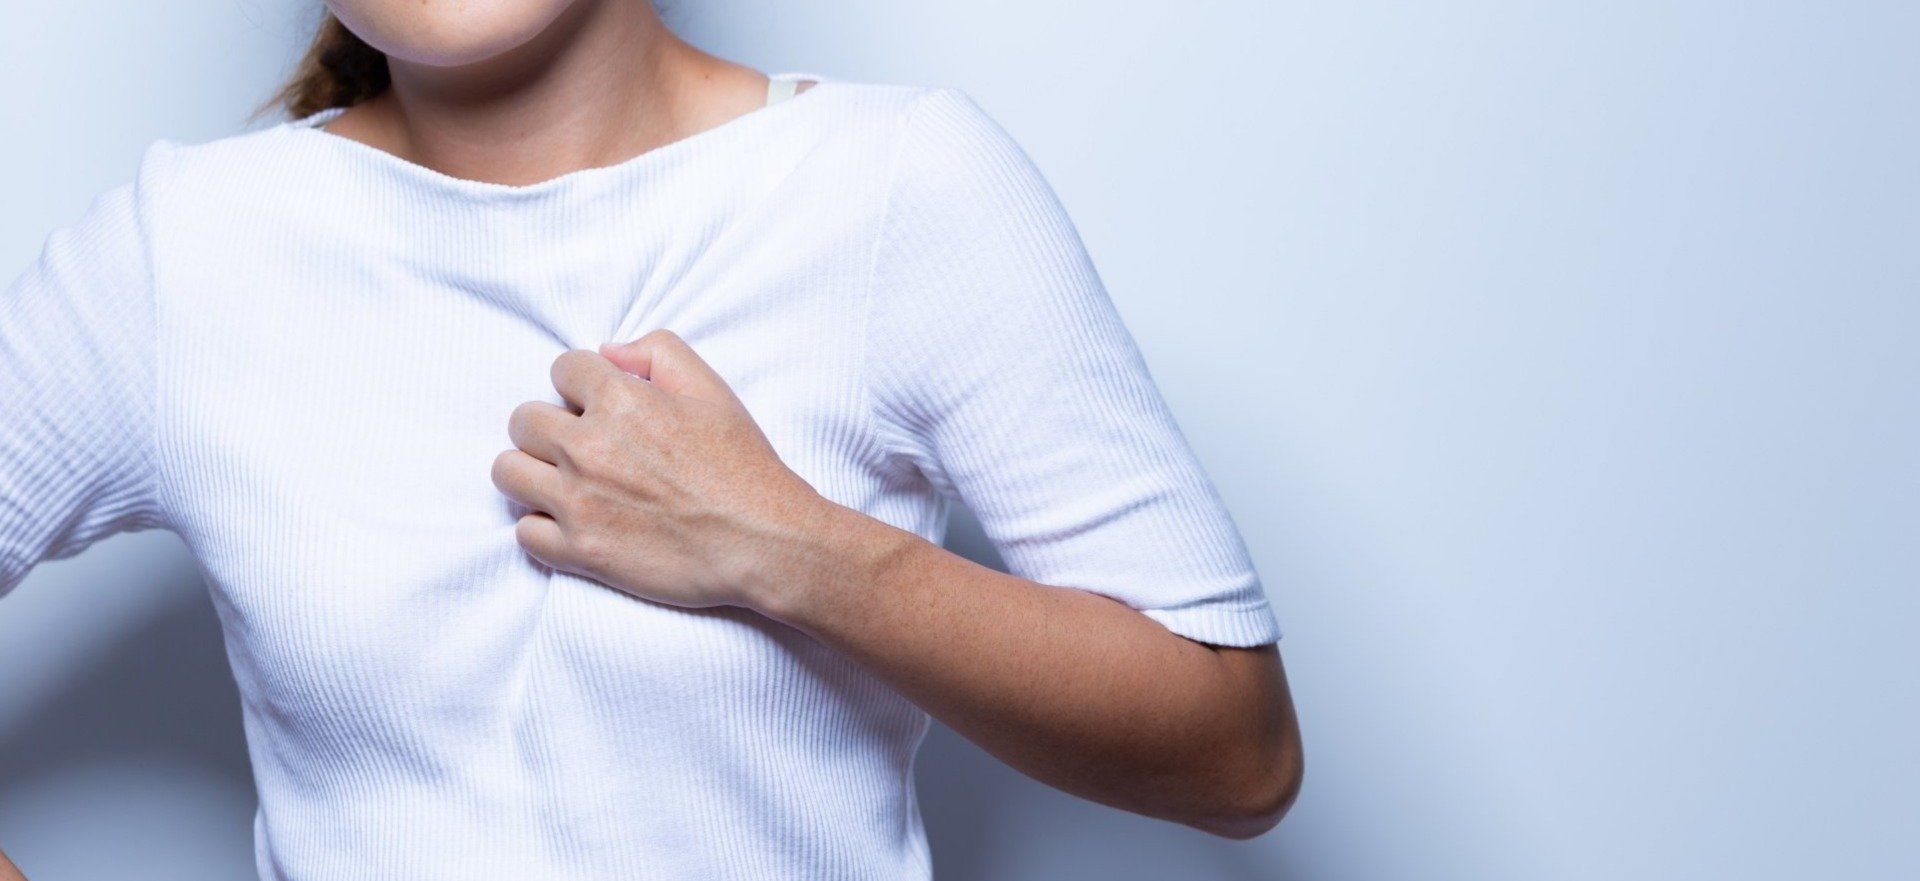 Surprising Signs That You May Have Acid Reflux